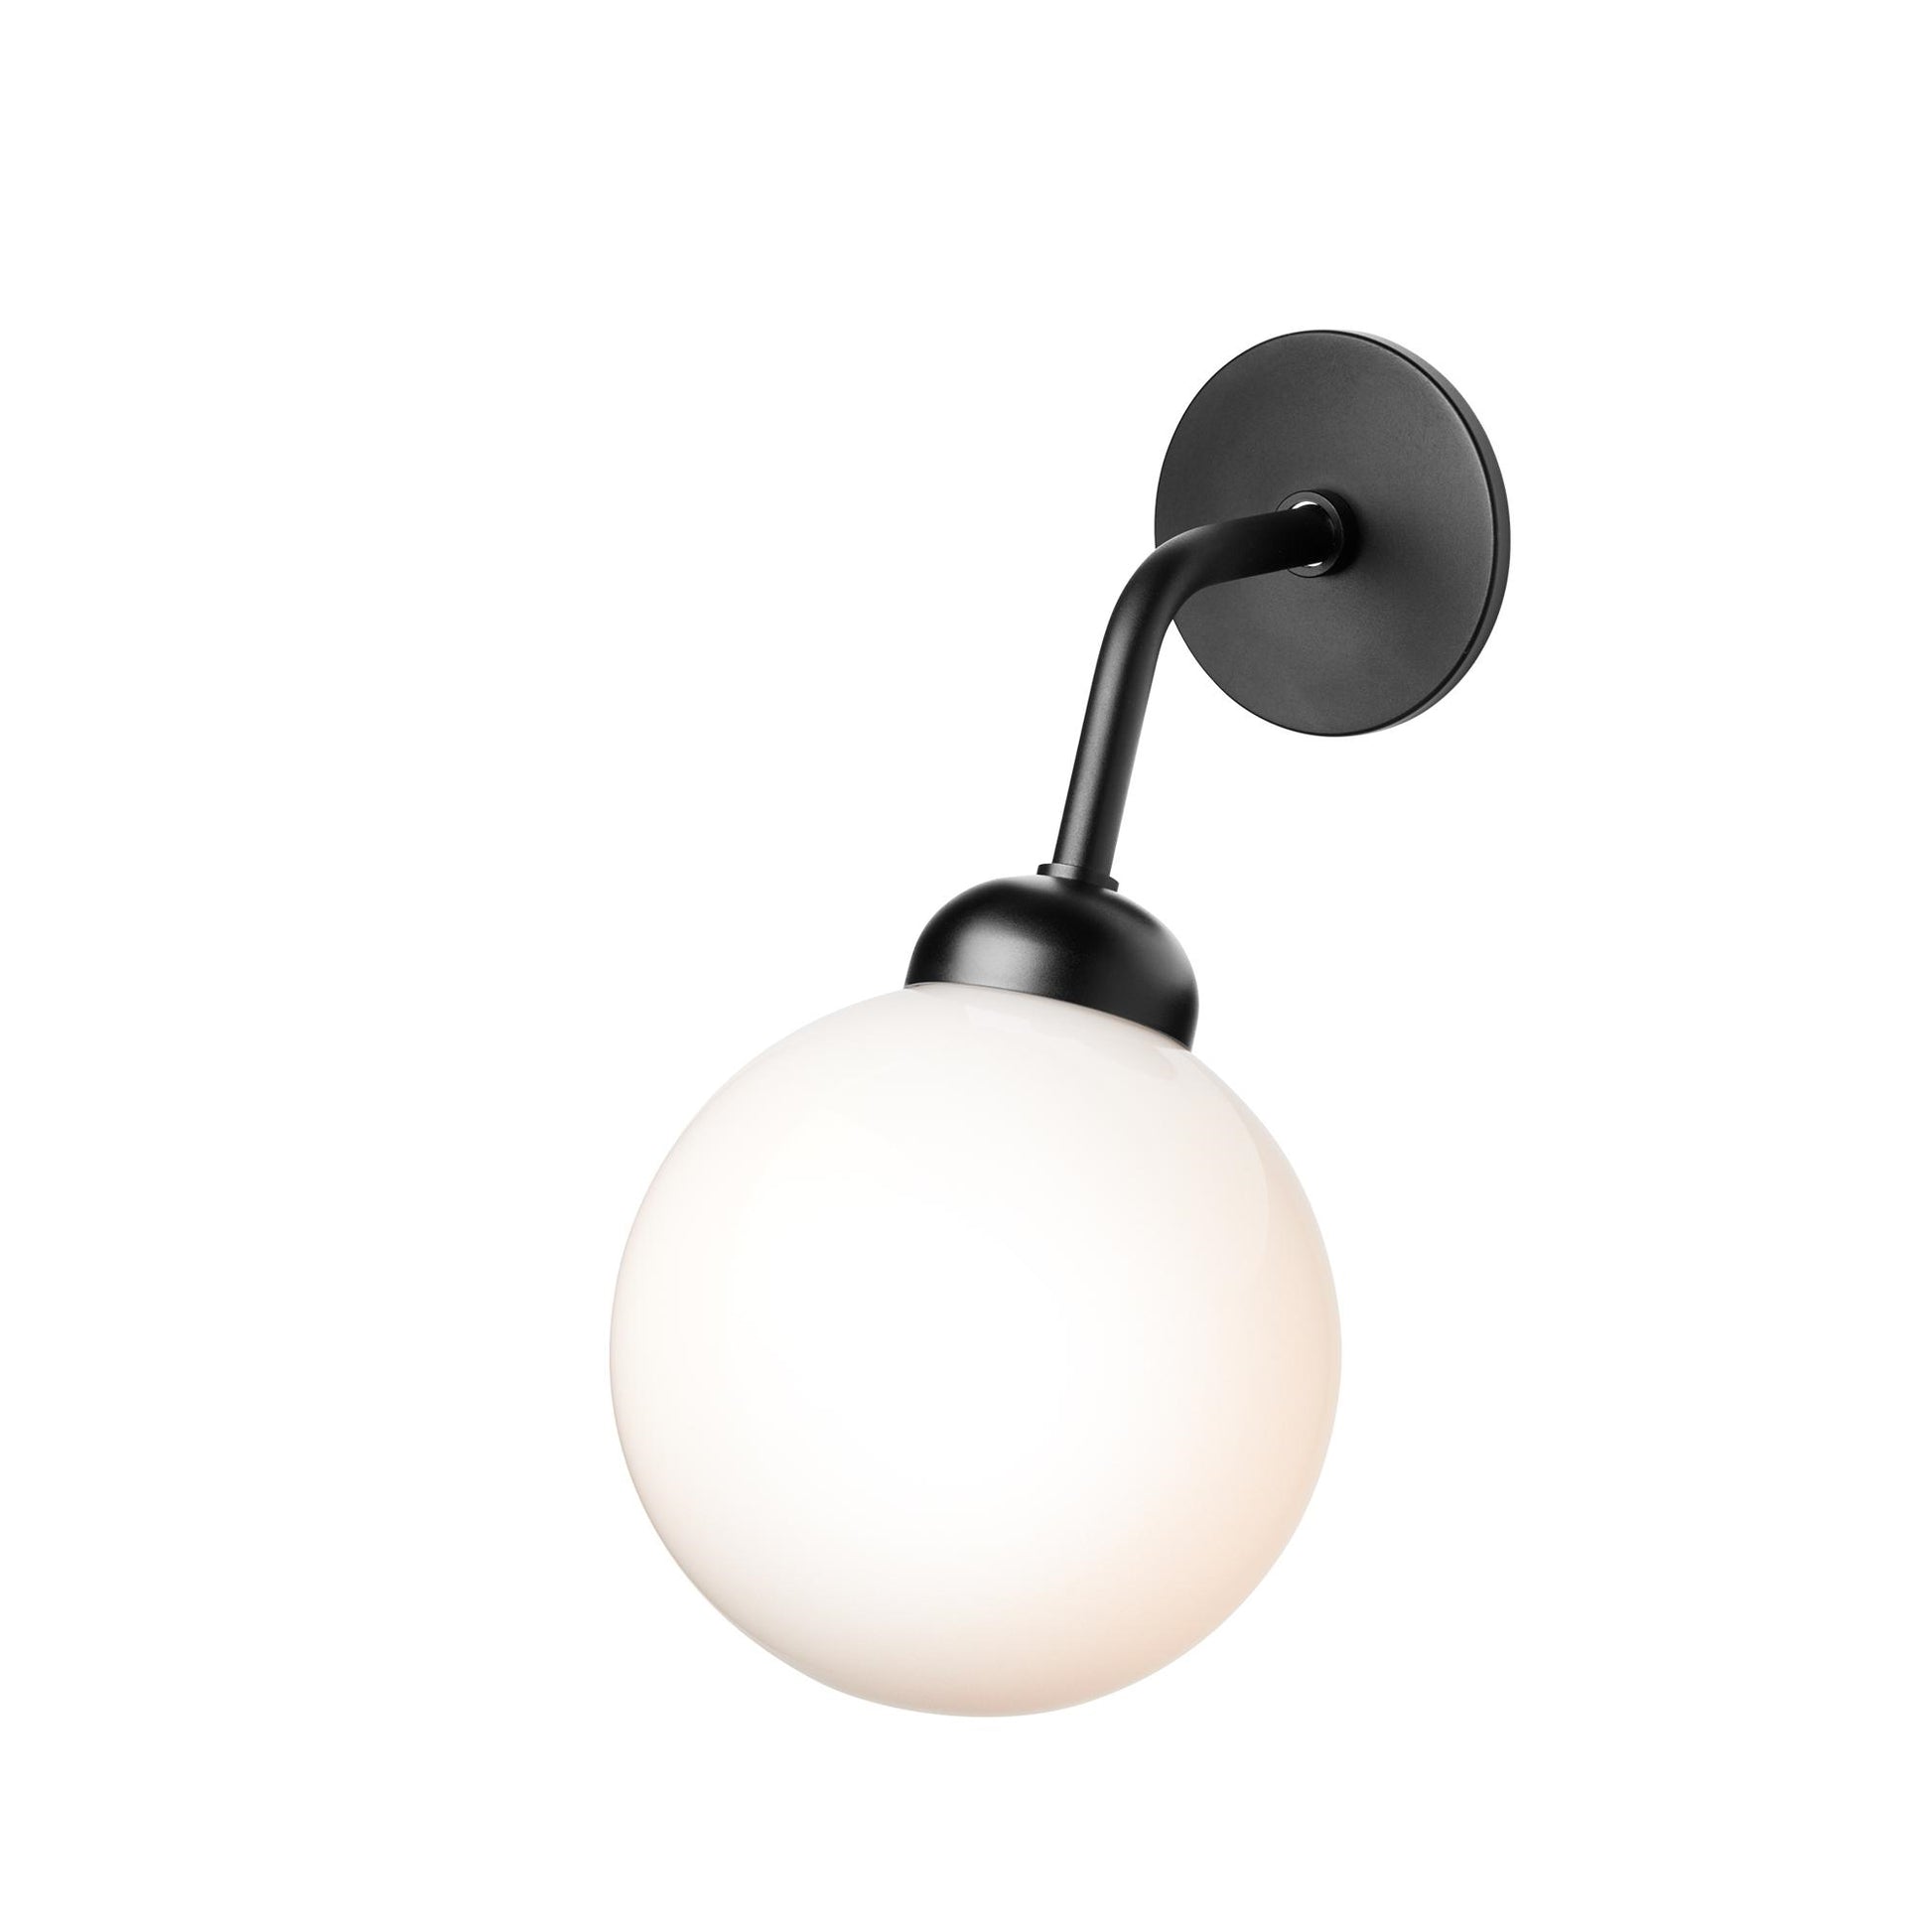 Apiales Hard-Wired Wall Lamp by Nuura #Satin Black / Hardwired